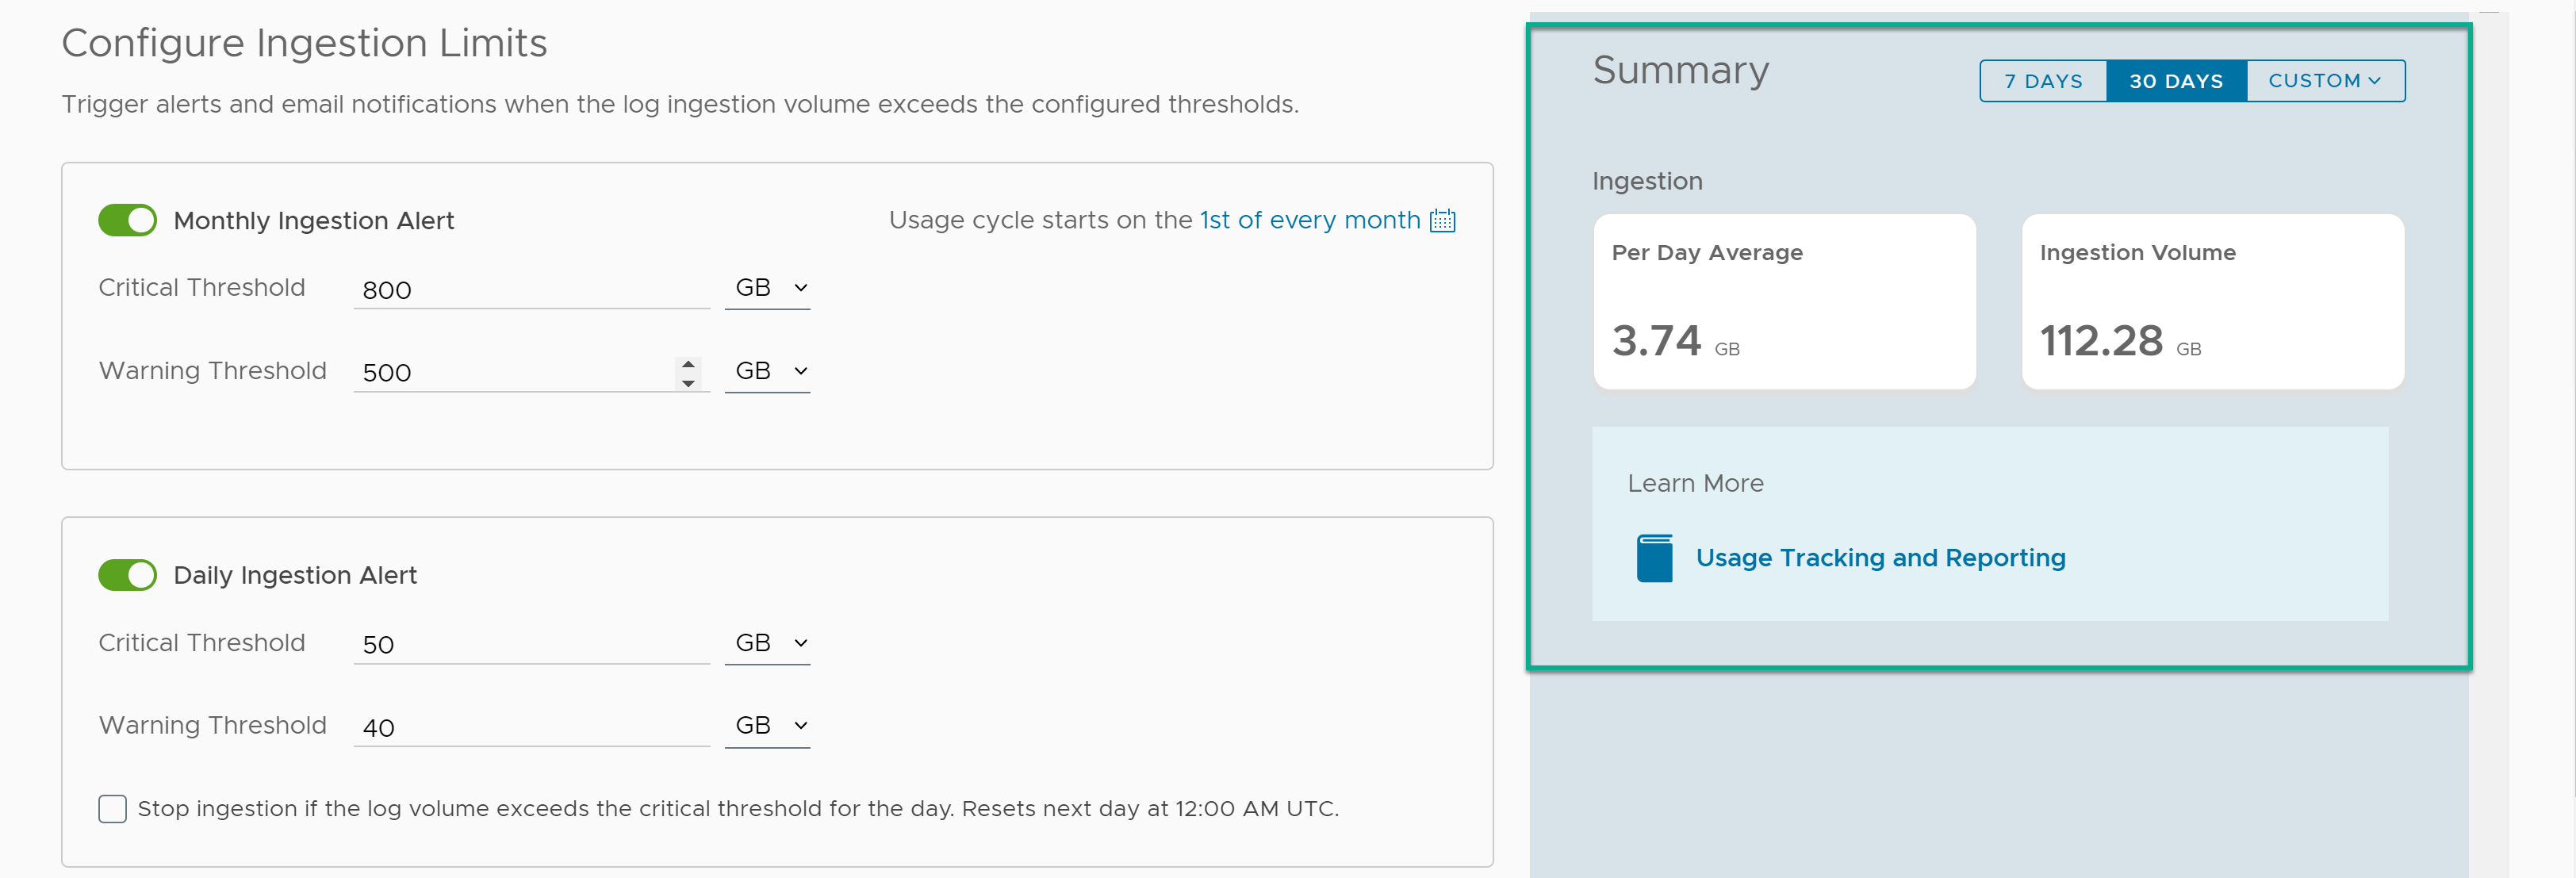 The summary section in the Ingestion Limits page helps you determine the average log consumption per day and month.